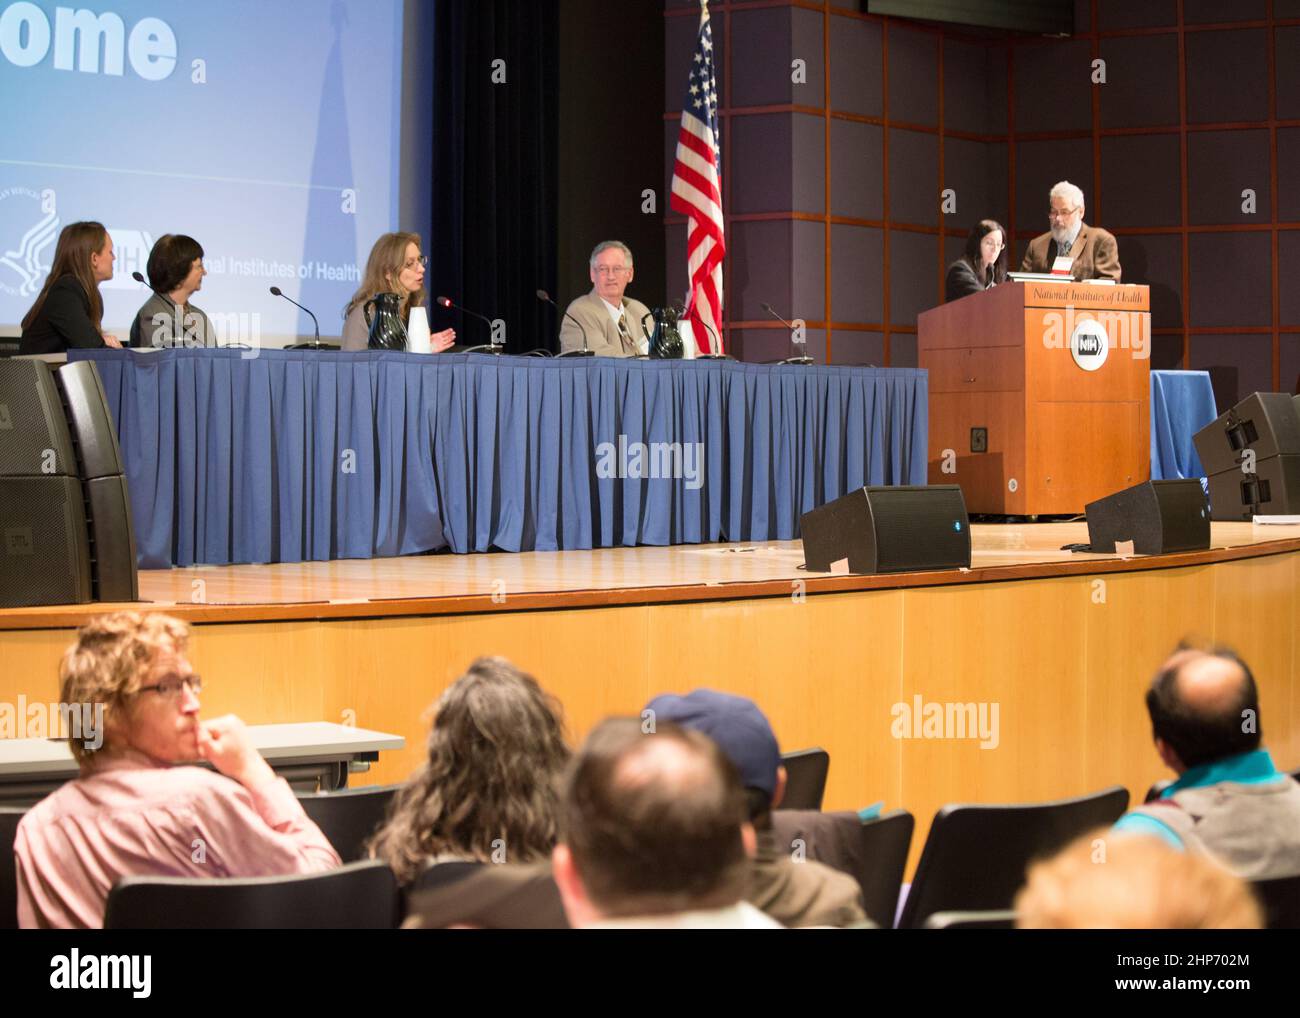 MJ NeuroSummit co-moderators (far right), Drs. Susan Borja from NIMH and John Williamson from NCCIH introduce the panel on the therapeutic potential of cannabinoids and marijuana, from left to right:  Dr. Christina Rabinak from Wayne State University, Dr. Cecilia Hillard from Medical College of Wisconsin, Dr. Andrea G. Hohmann from Indiana University and Dr. Barth Wilsey from the University of California, San Diego ca.  2016 Stock Photo